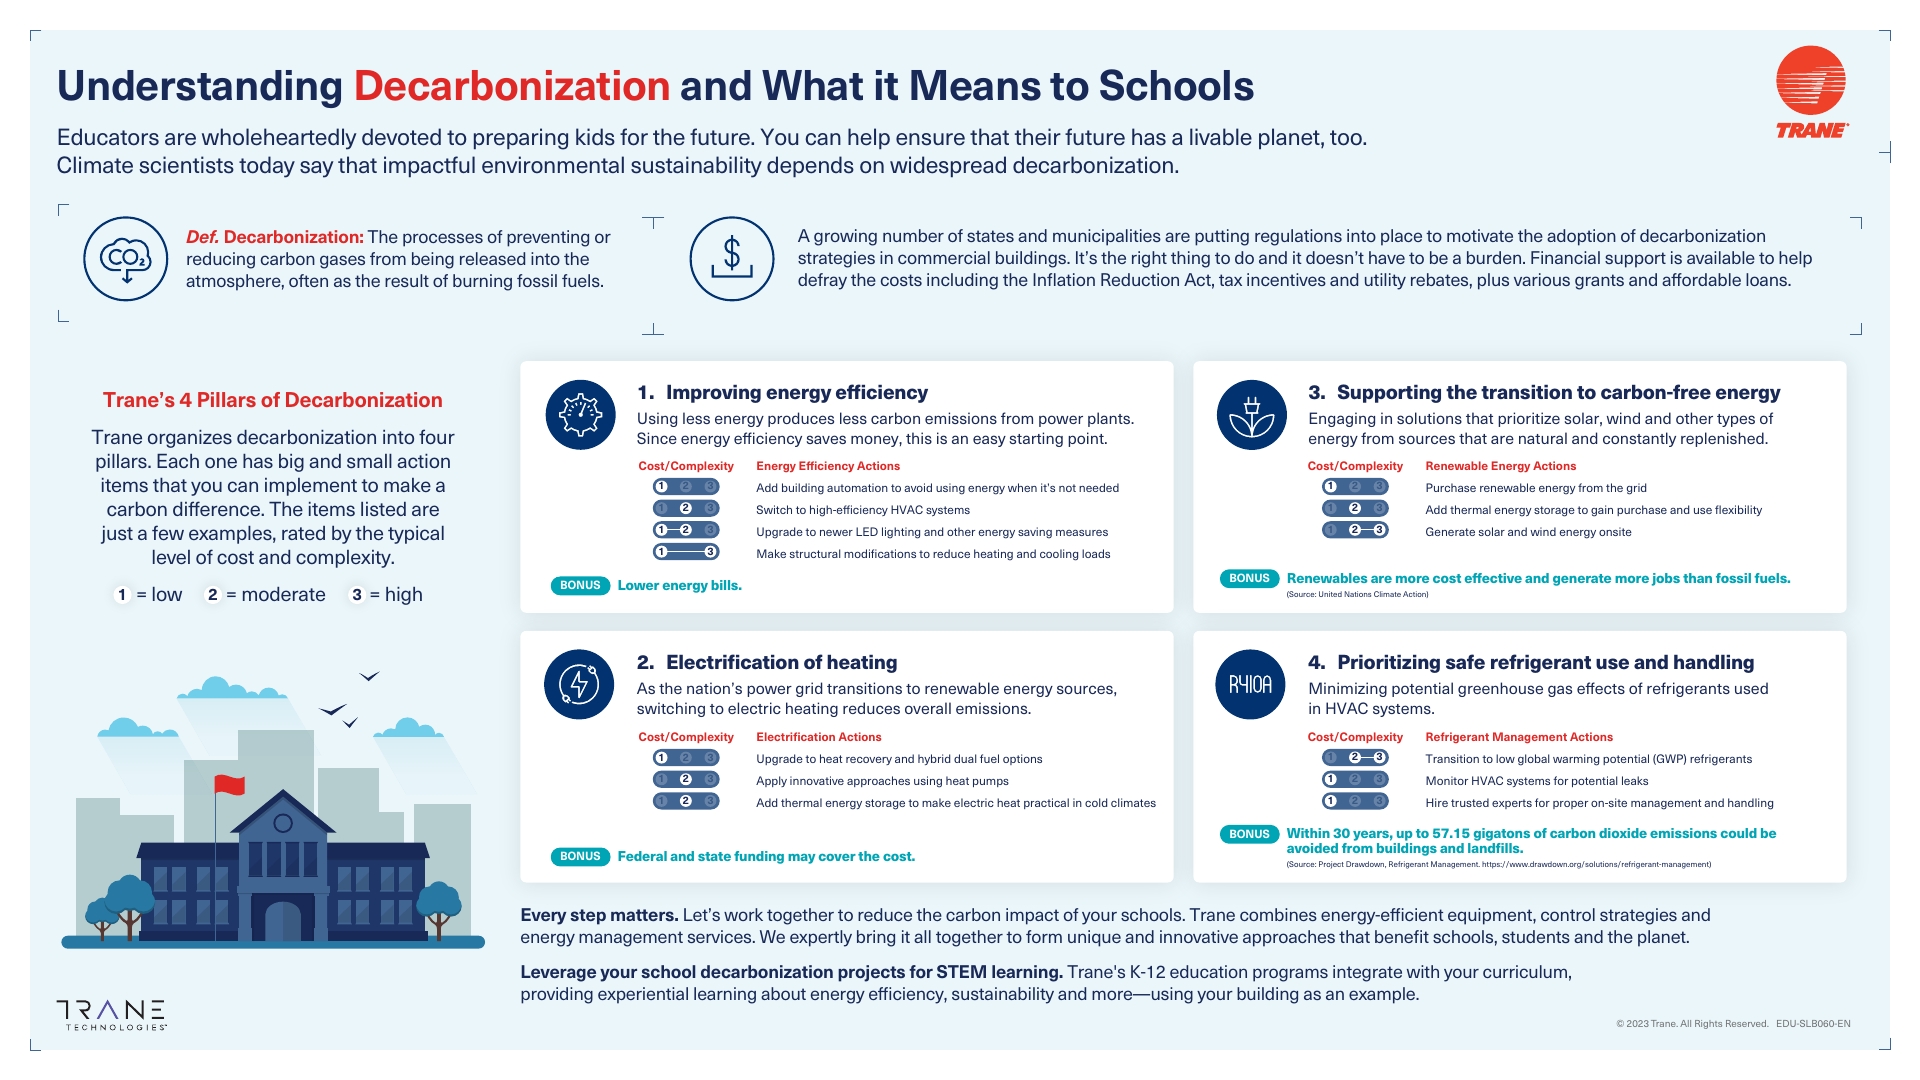 tc-demystifying-decarb-for-schools-infographic.jpg